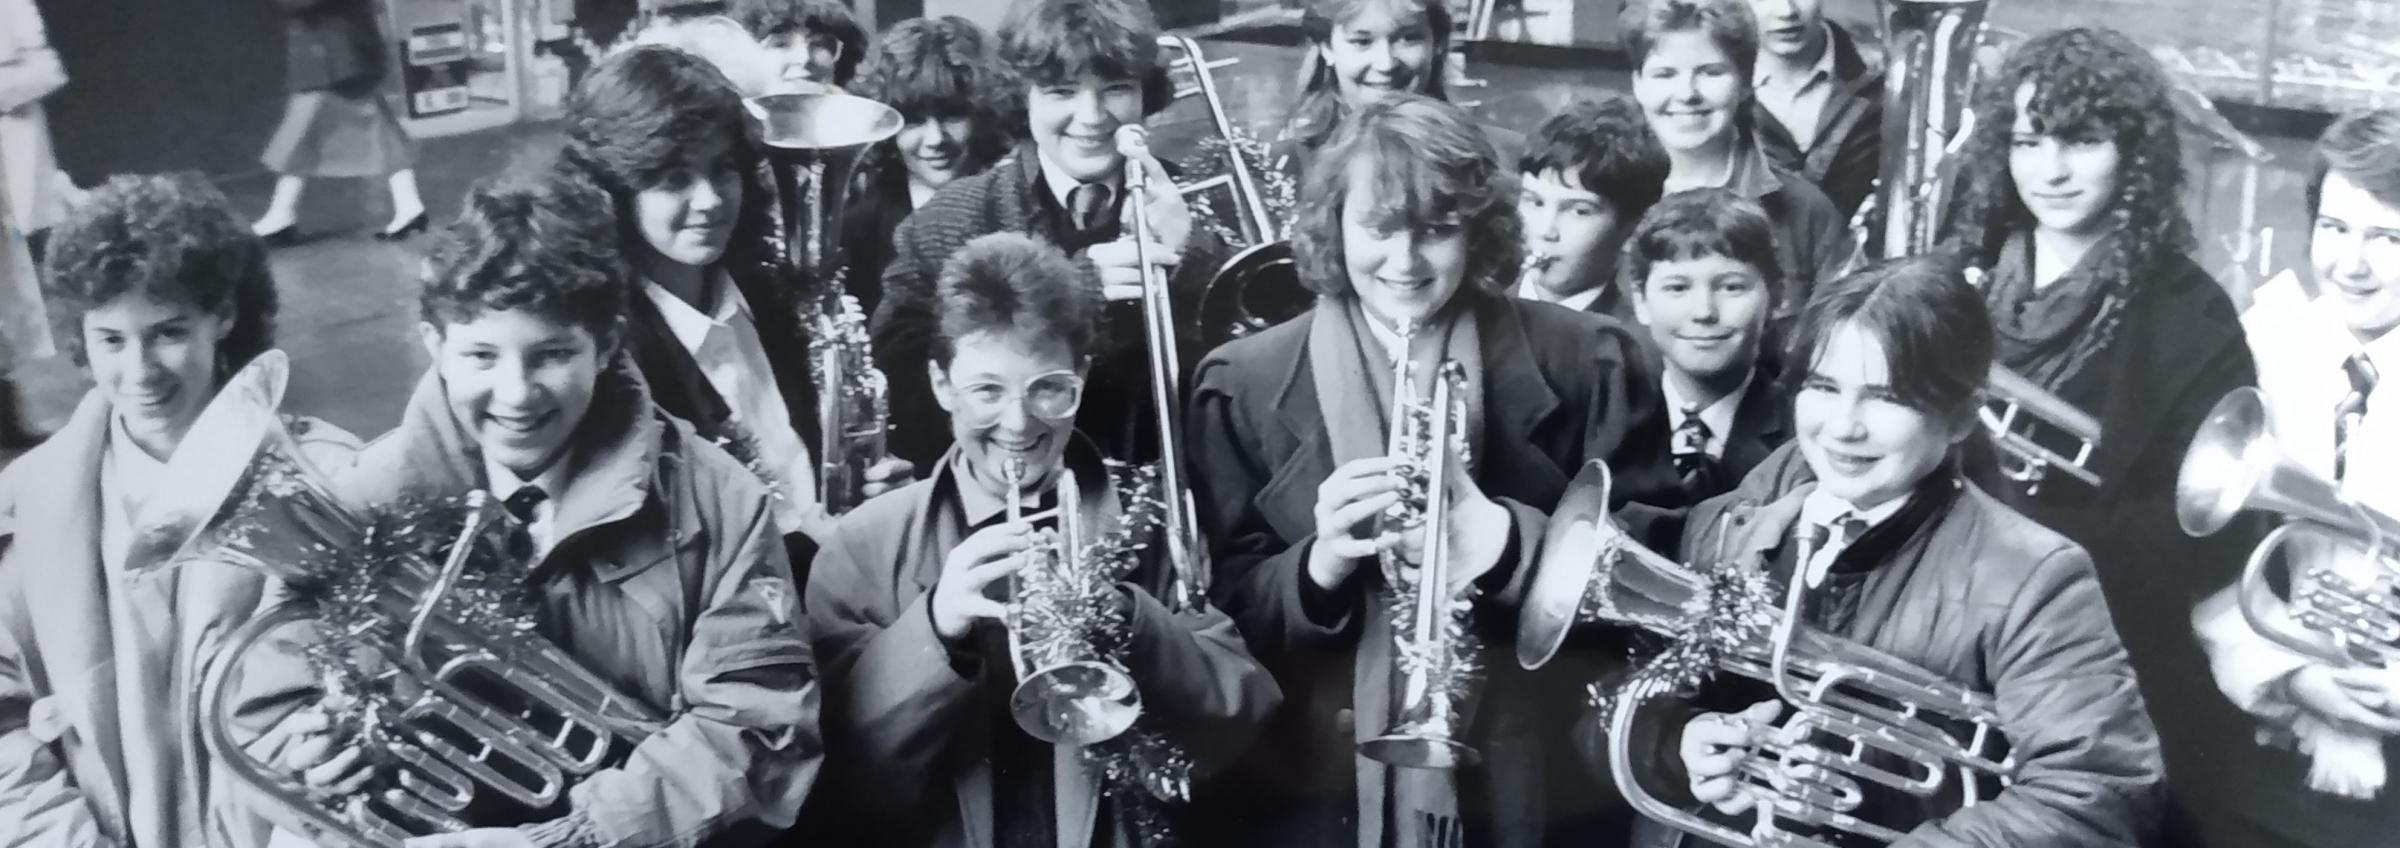 The schools youth band pictured in December 1987